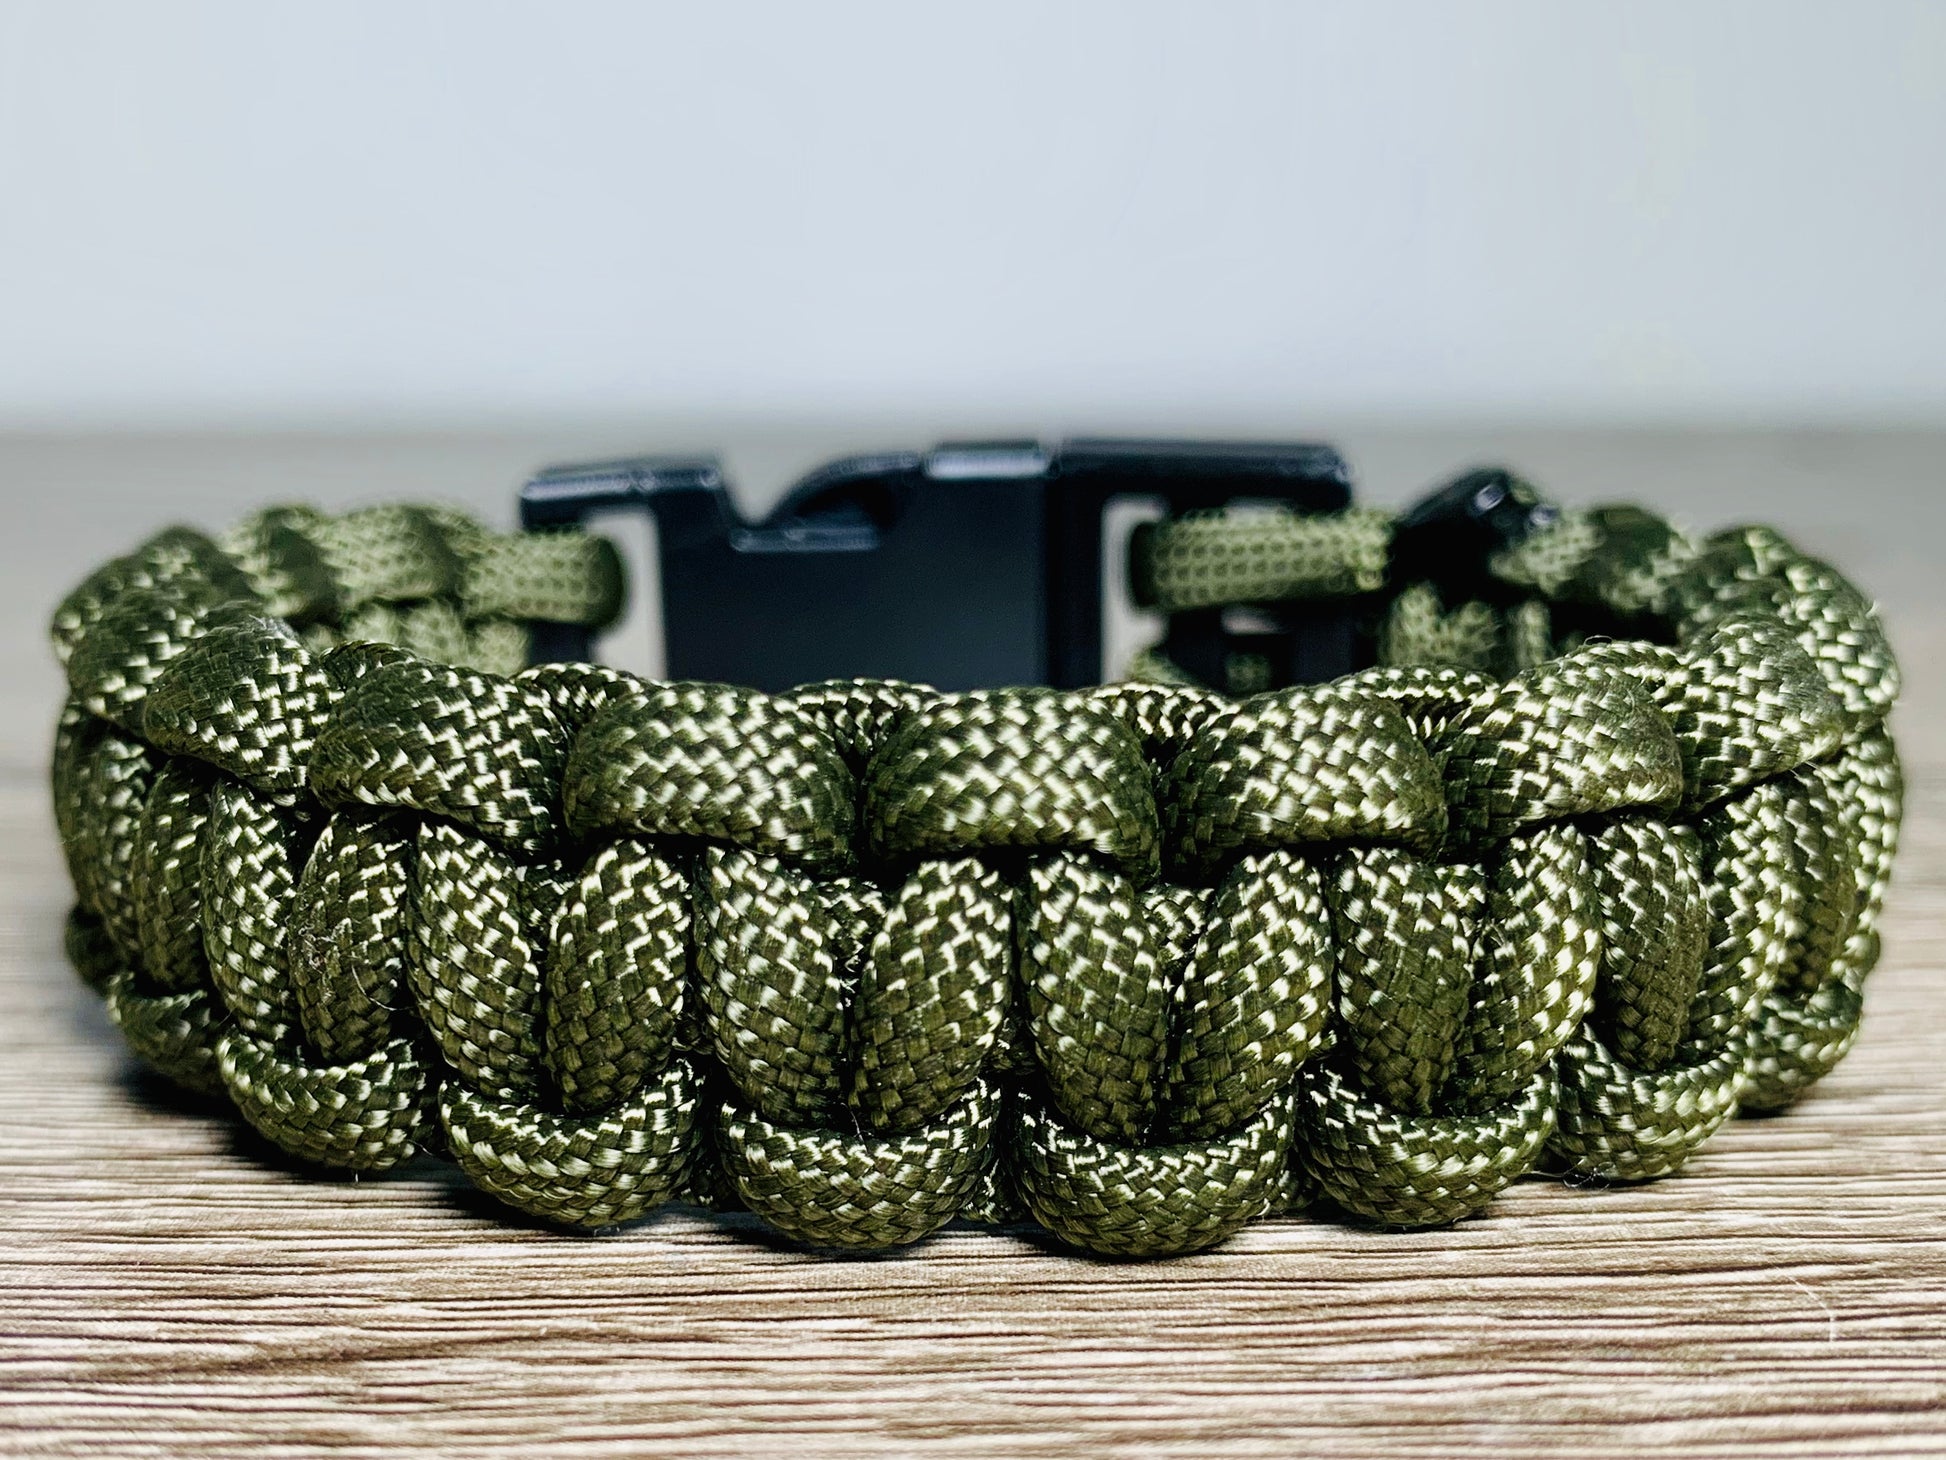 Engineered Green Paracord Survival Bracelet XL (Fits 8-8.5 inch wrists)